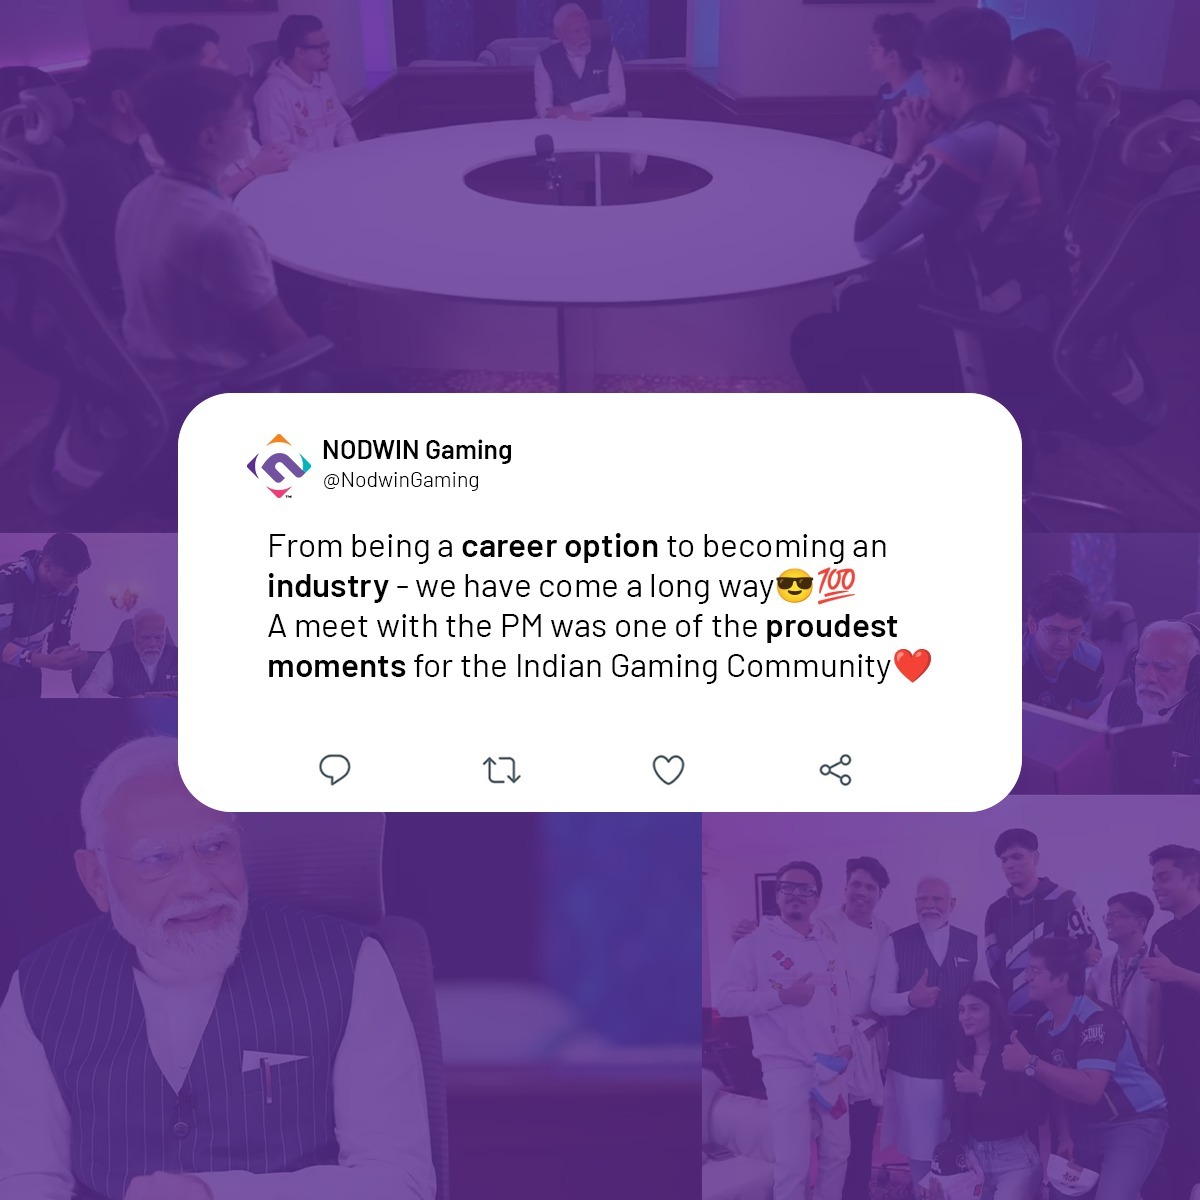 A proud moment ❤️ What was your favourite part from the discussion?😎
.
.
#ProudMoment #PrimeMinister #PrimeMinisterModi #esports #streamer #gaming #india #gamingcommunity #indiangamers #indianstreamers #gaming #game #indianesports #indiangamers #indiancity